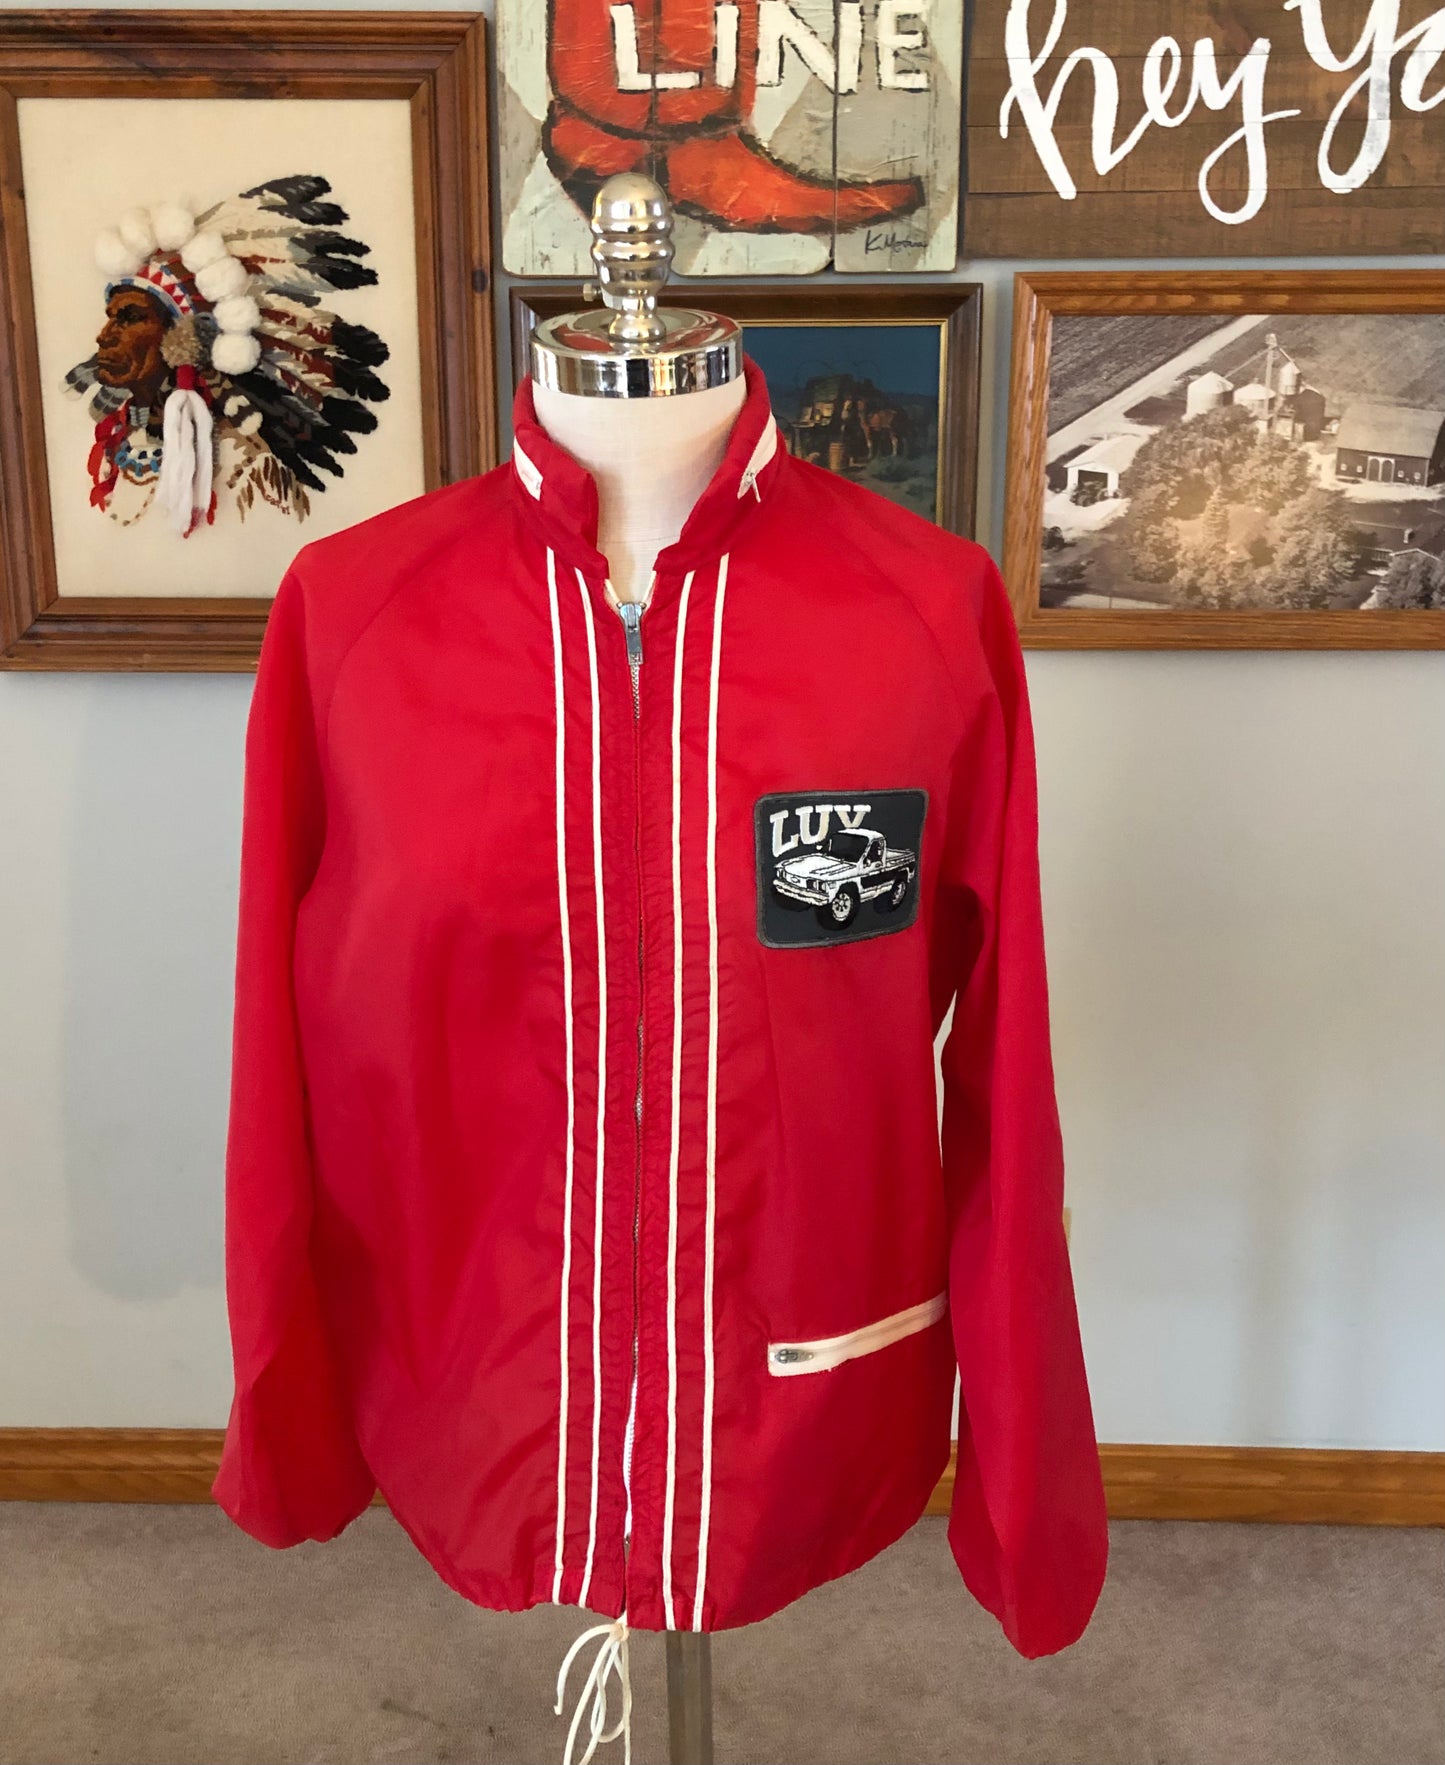 Vintage Nylon Windbreaker Jacket with Racing Stripes with LUV Truck Patch